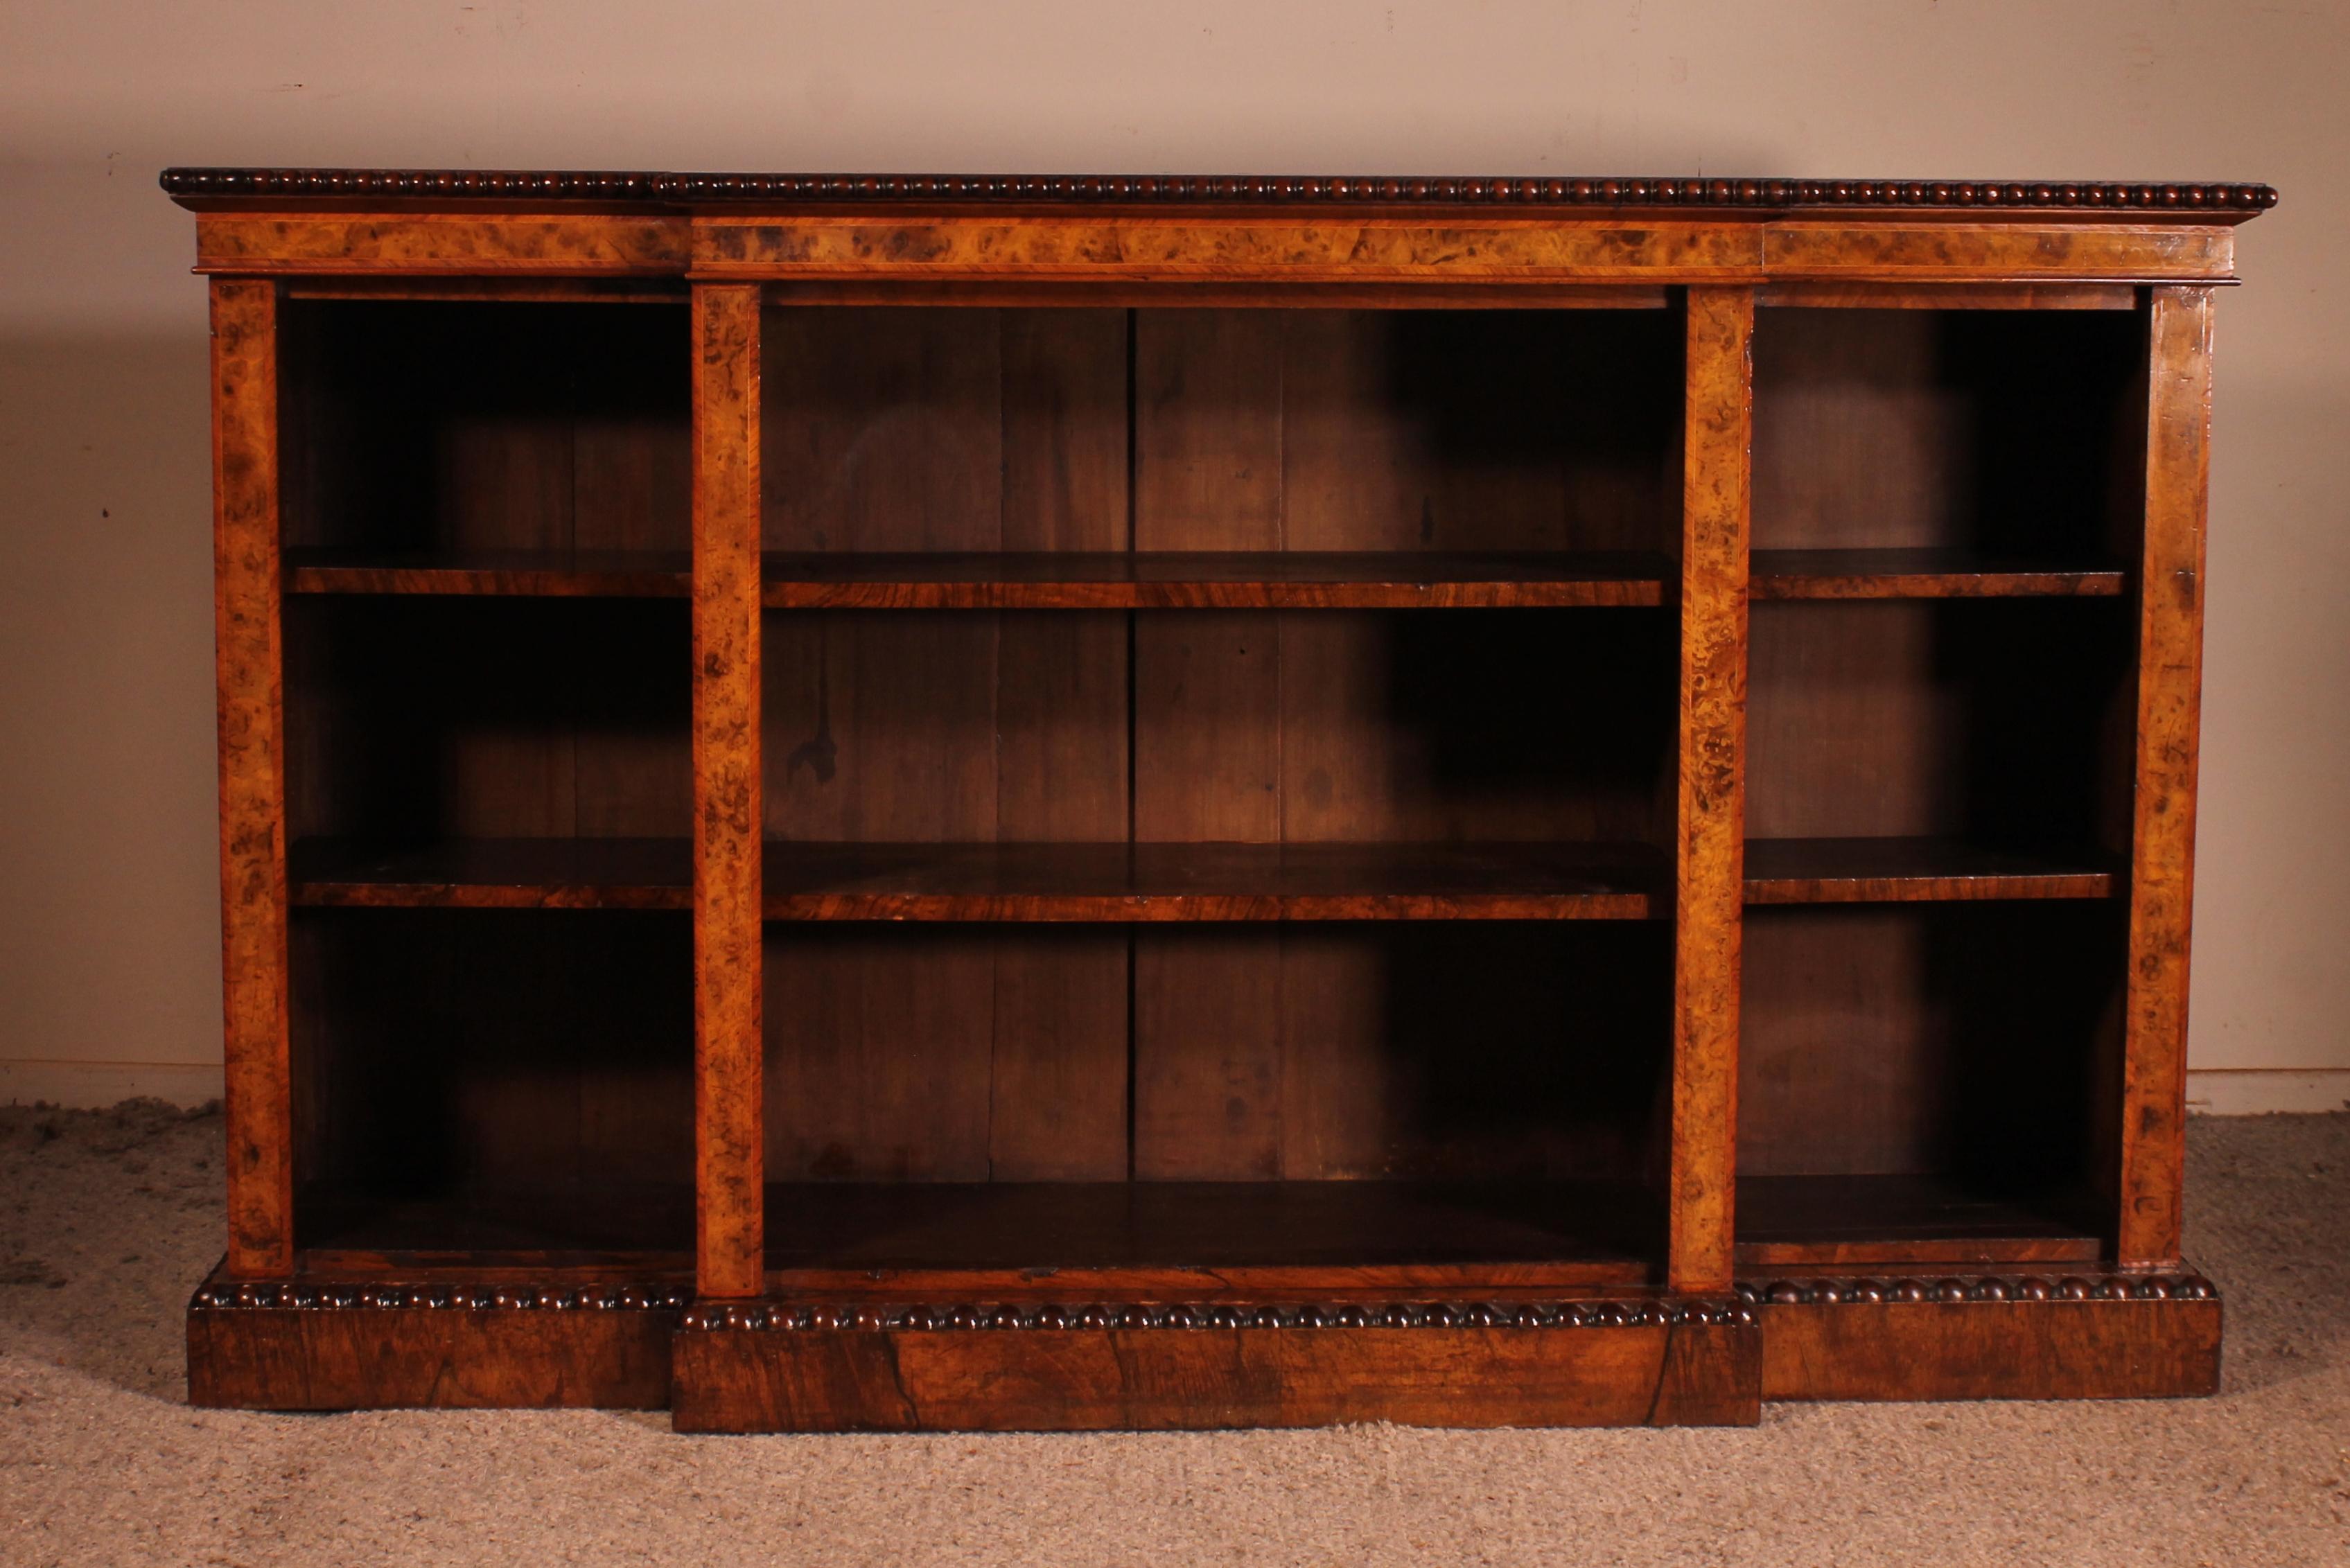 Elegant large low open bookcase in walnut and burr walnut from the 19th century from England
Elegant and rare open library in walnut and burr walnut from the 19th century
It is rare to find a library of such fine quality in walnut.
Very elegant